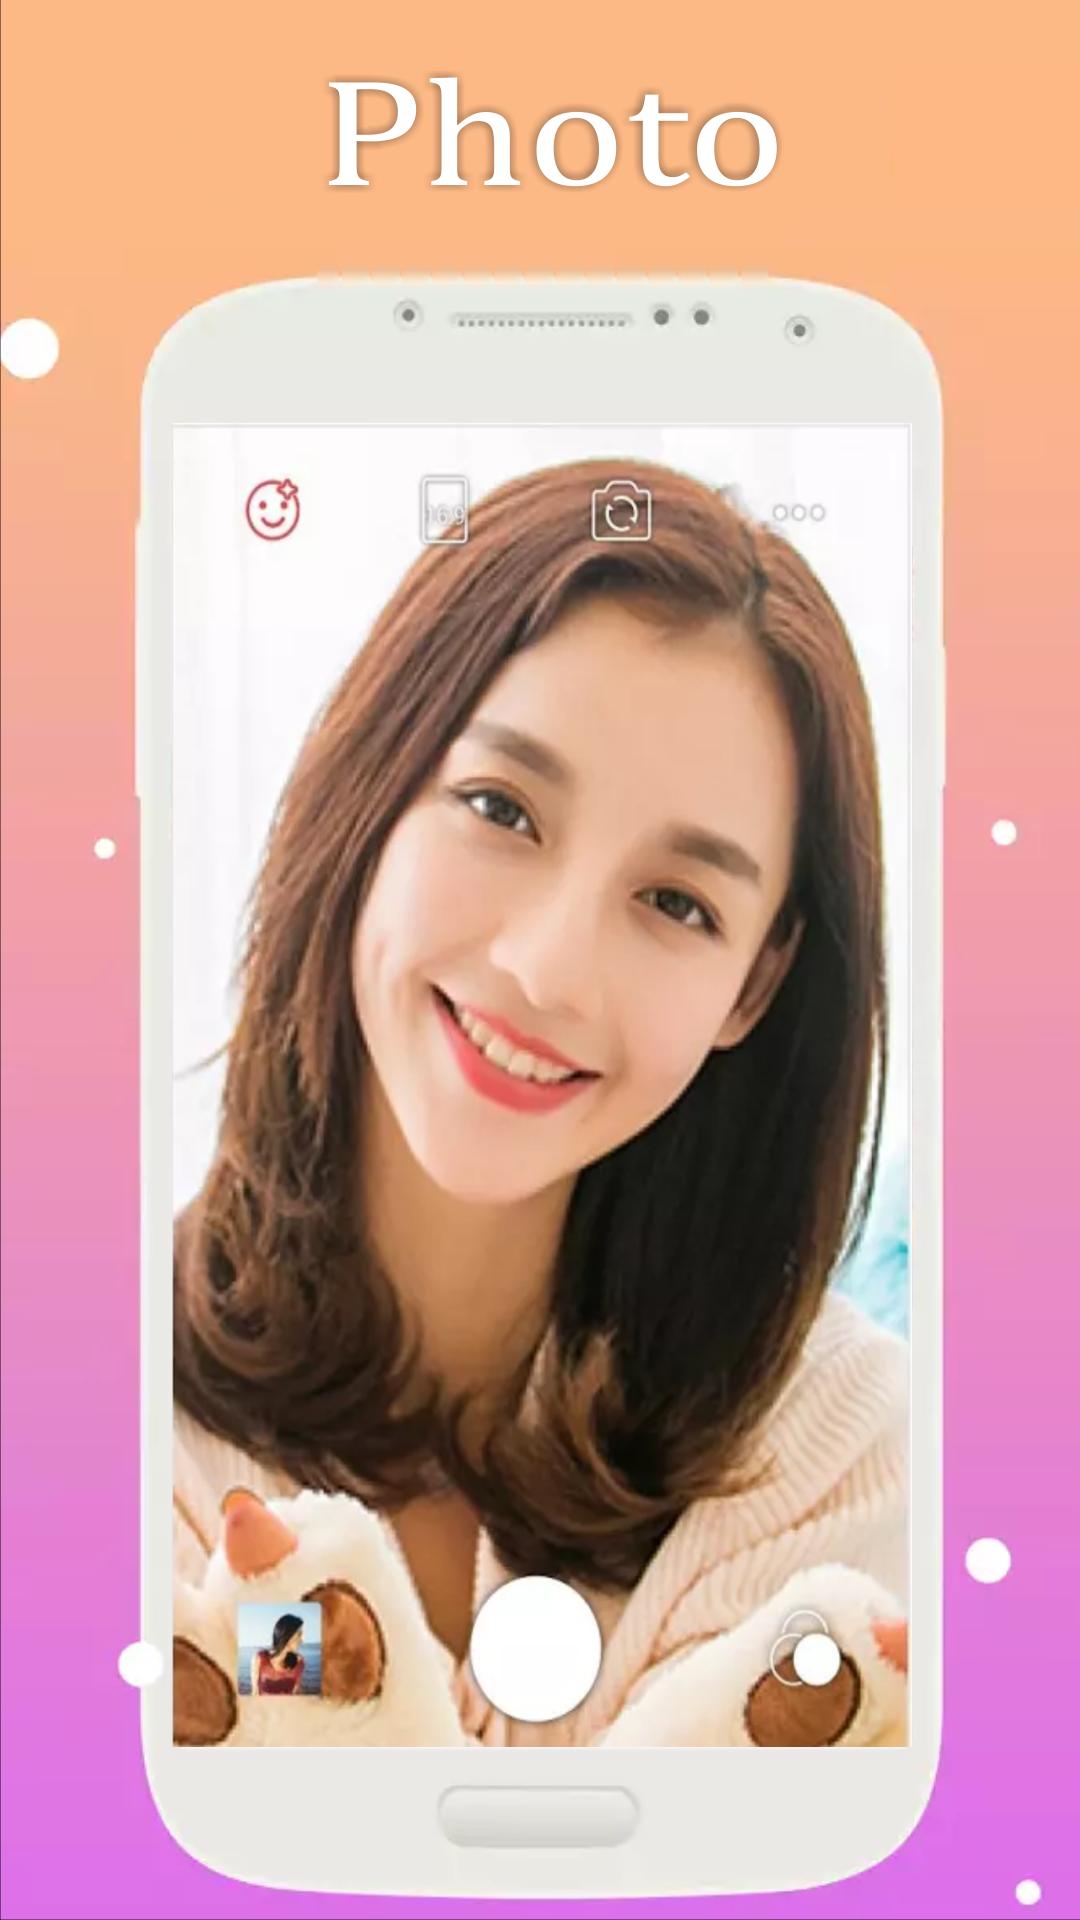 New Retrica - Selfie Photo 2018 for Android - APK Download